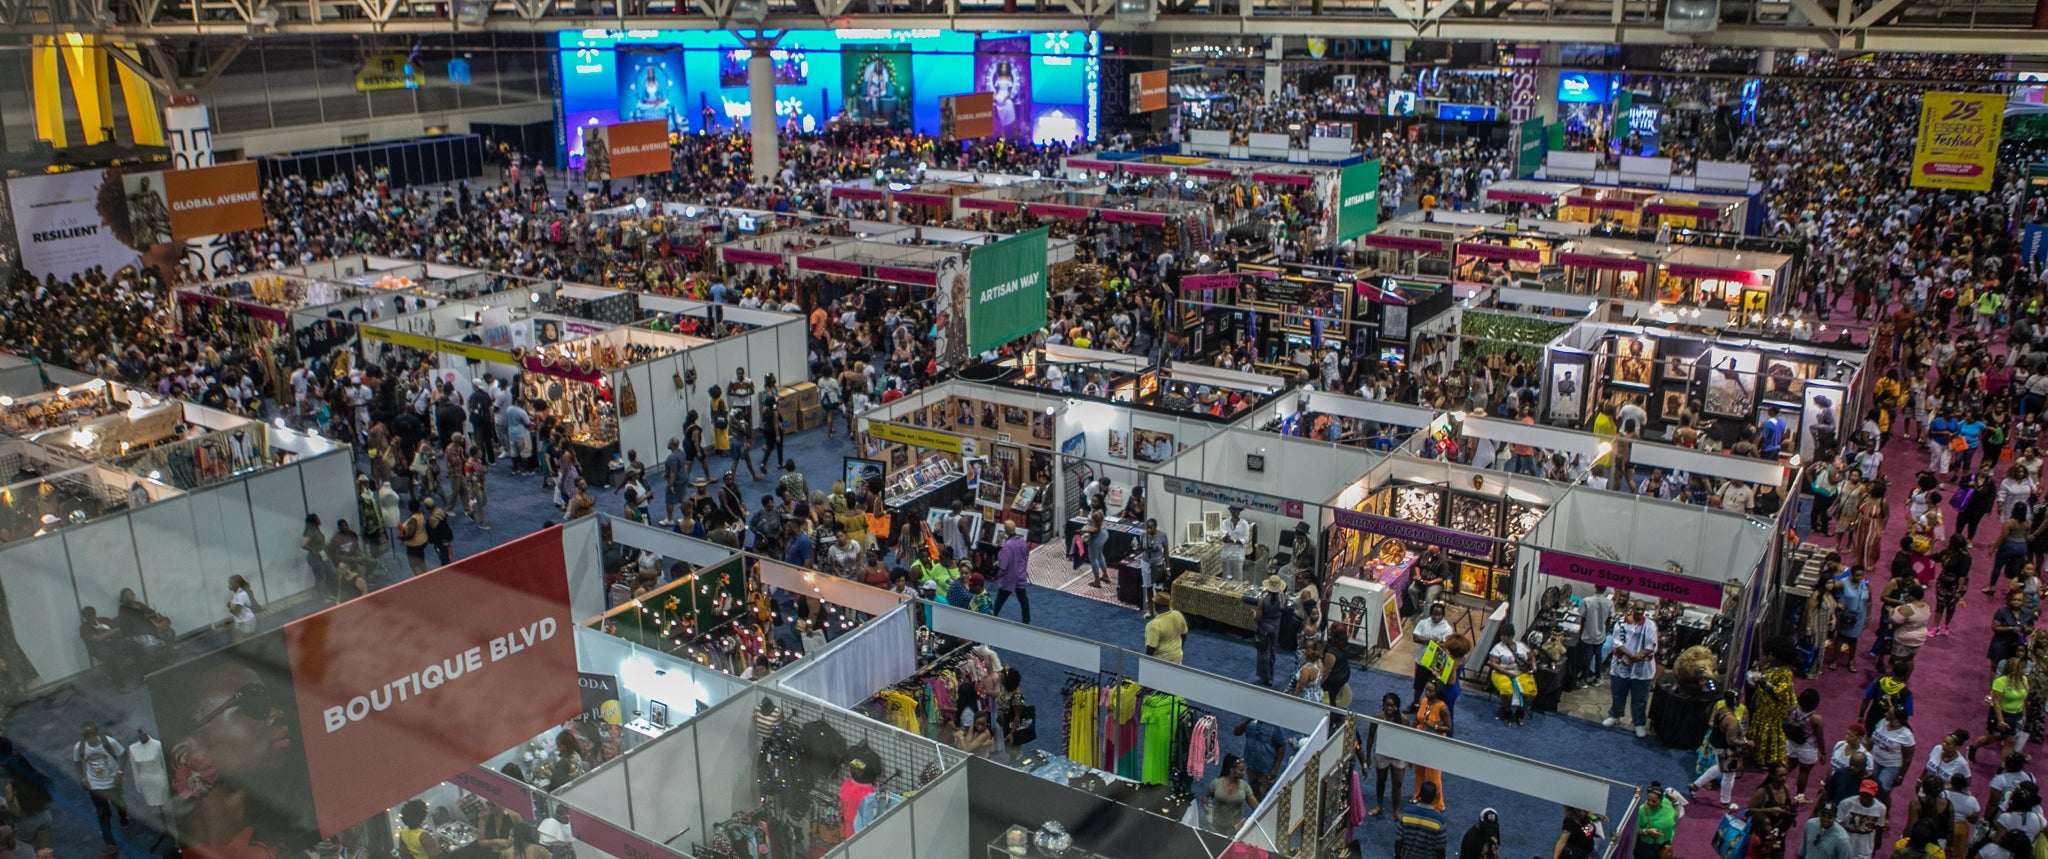 Calling All Business Owners: Vendor Applications For The 2022 ESSENCE Festival Are Still Open!